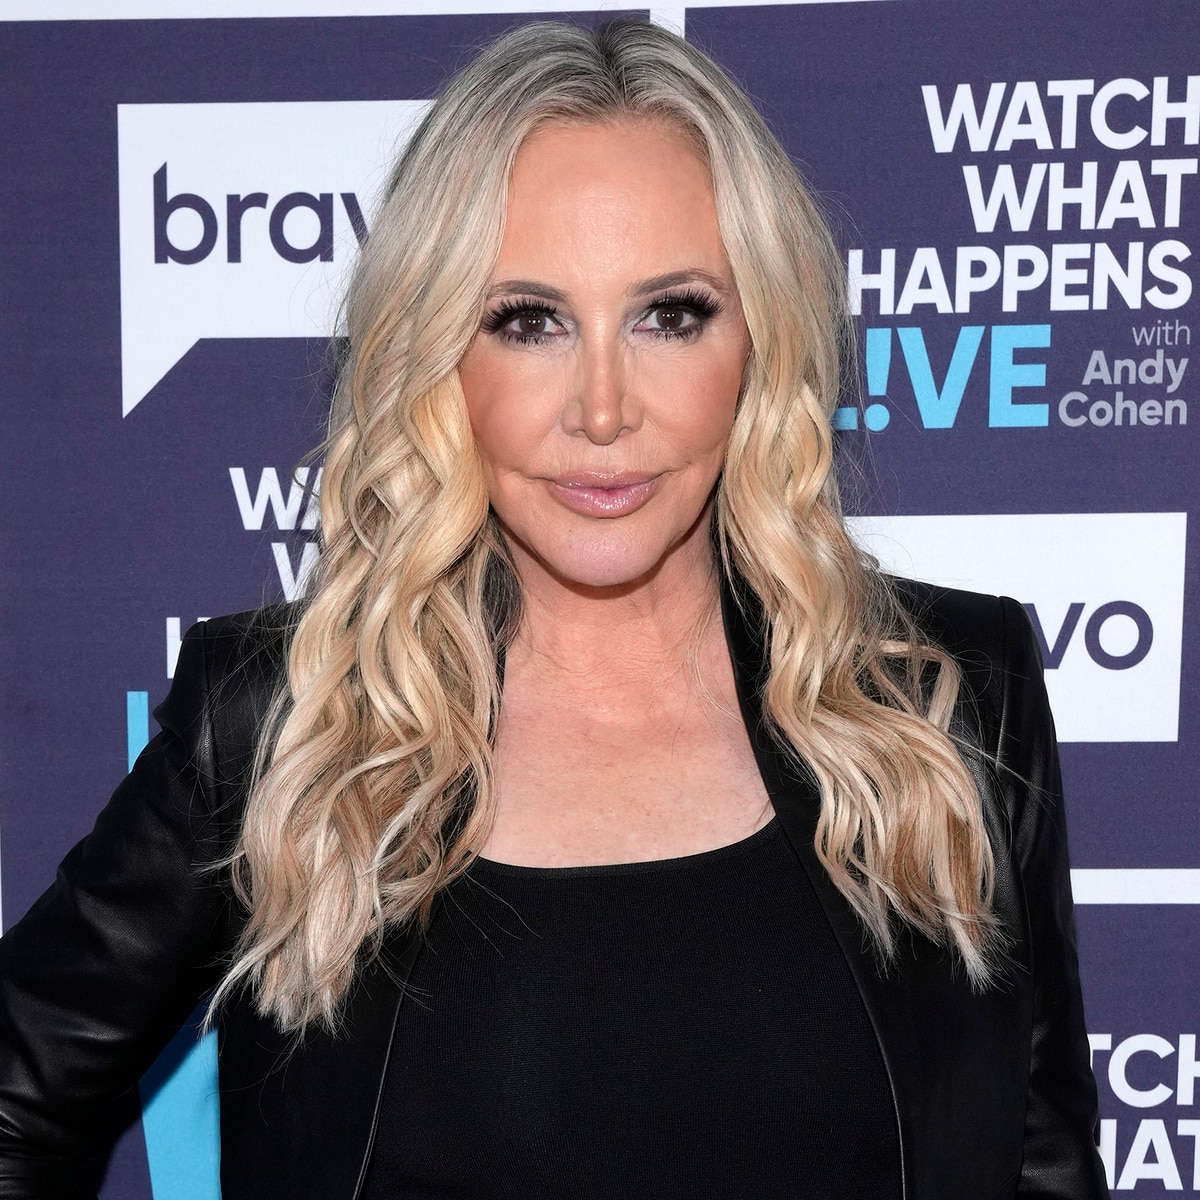 RHOC’s Shannon Beador Officially Charged With DUI & Hit-and-Run ...